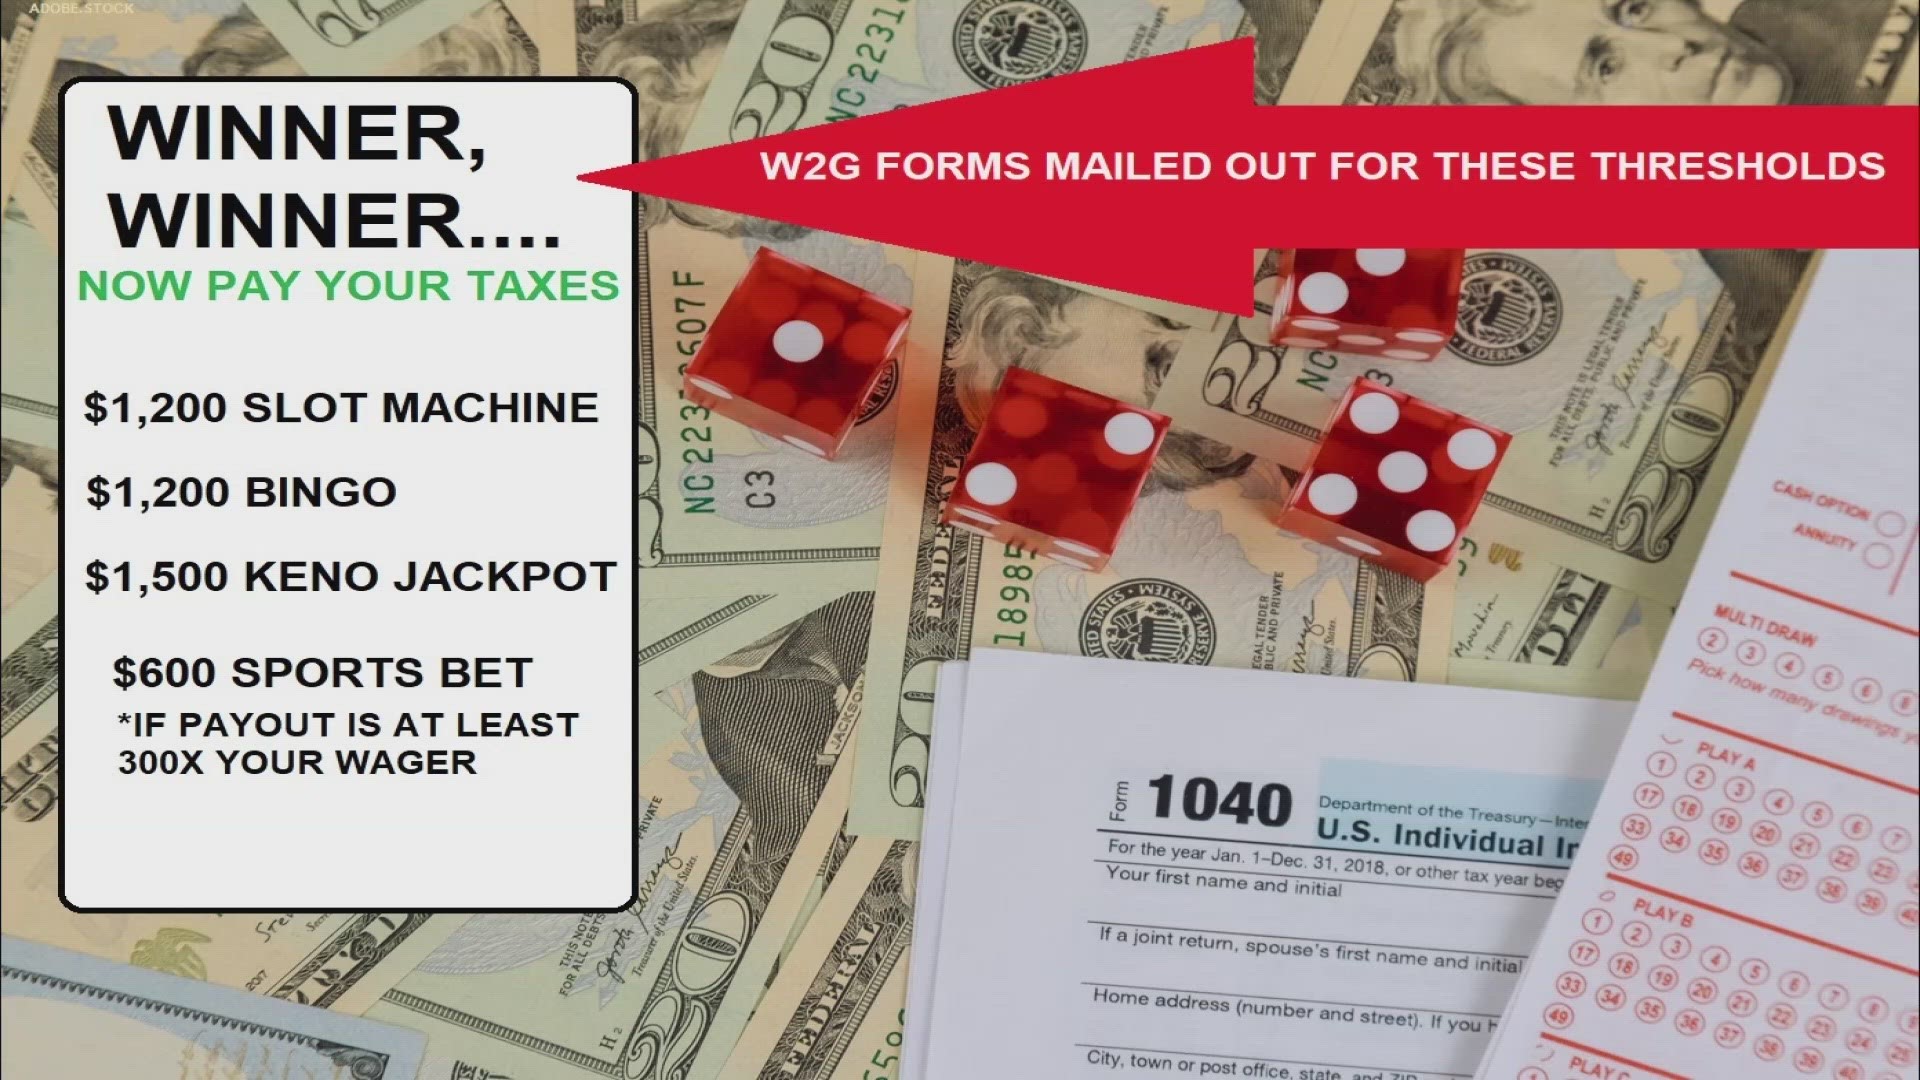 Sports gambling is now legal in North Carolina. You’ll have to report winnings to the IRS.